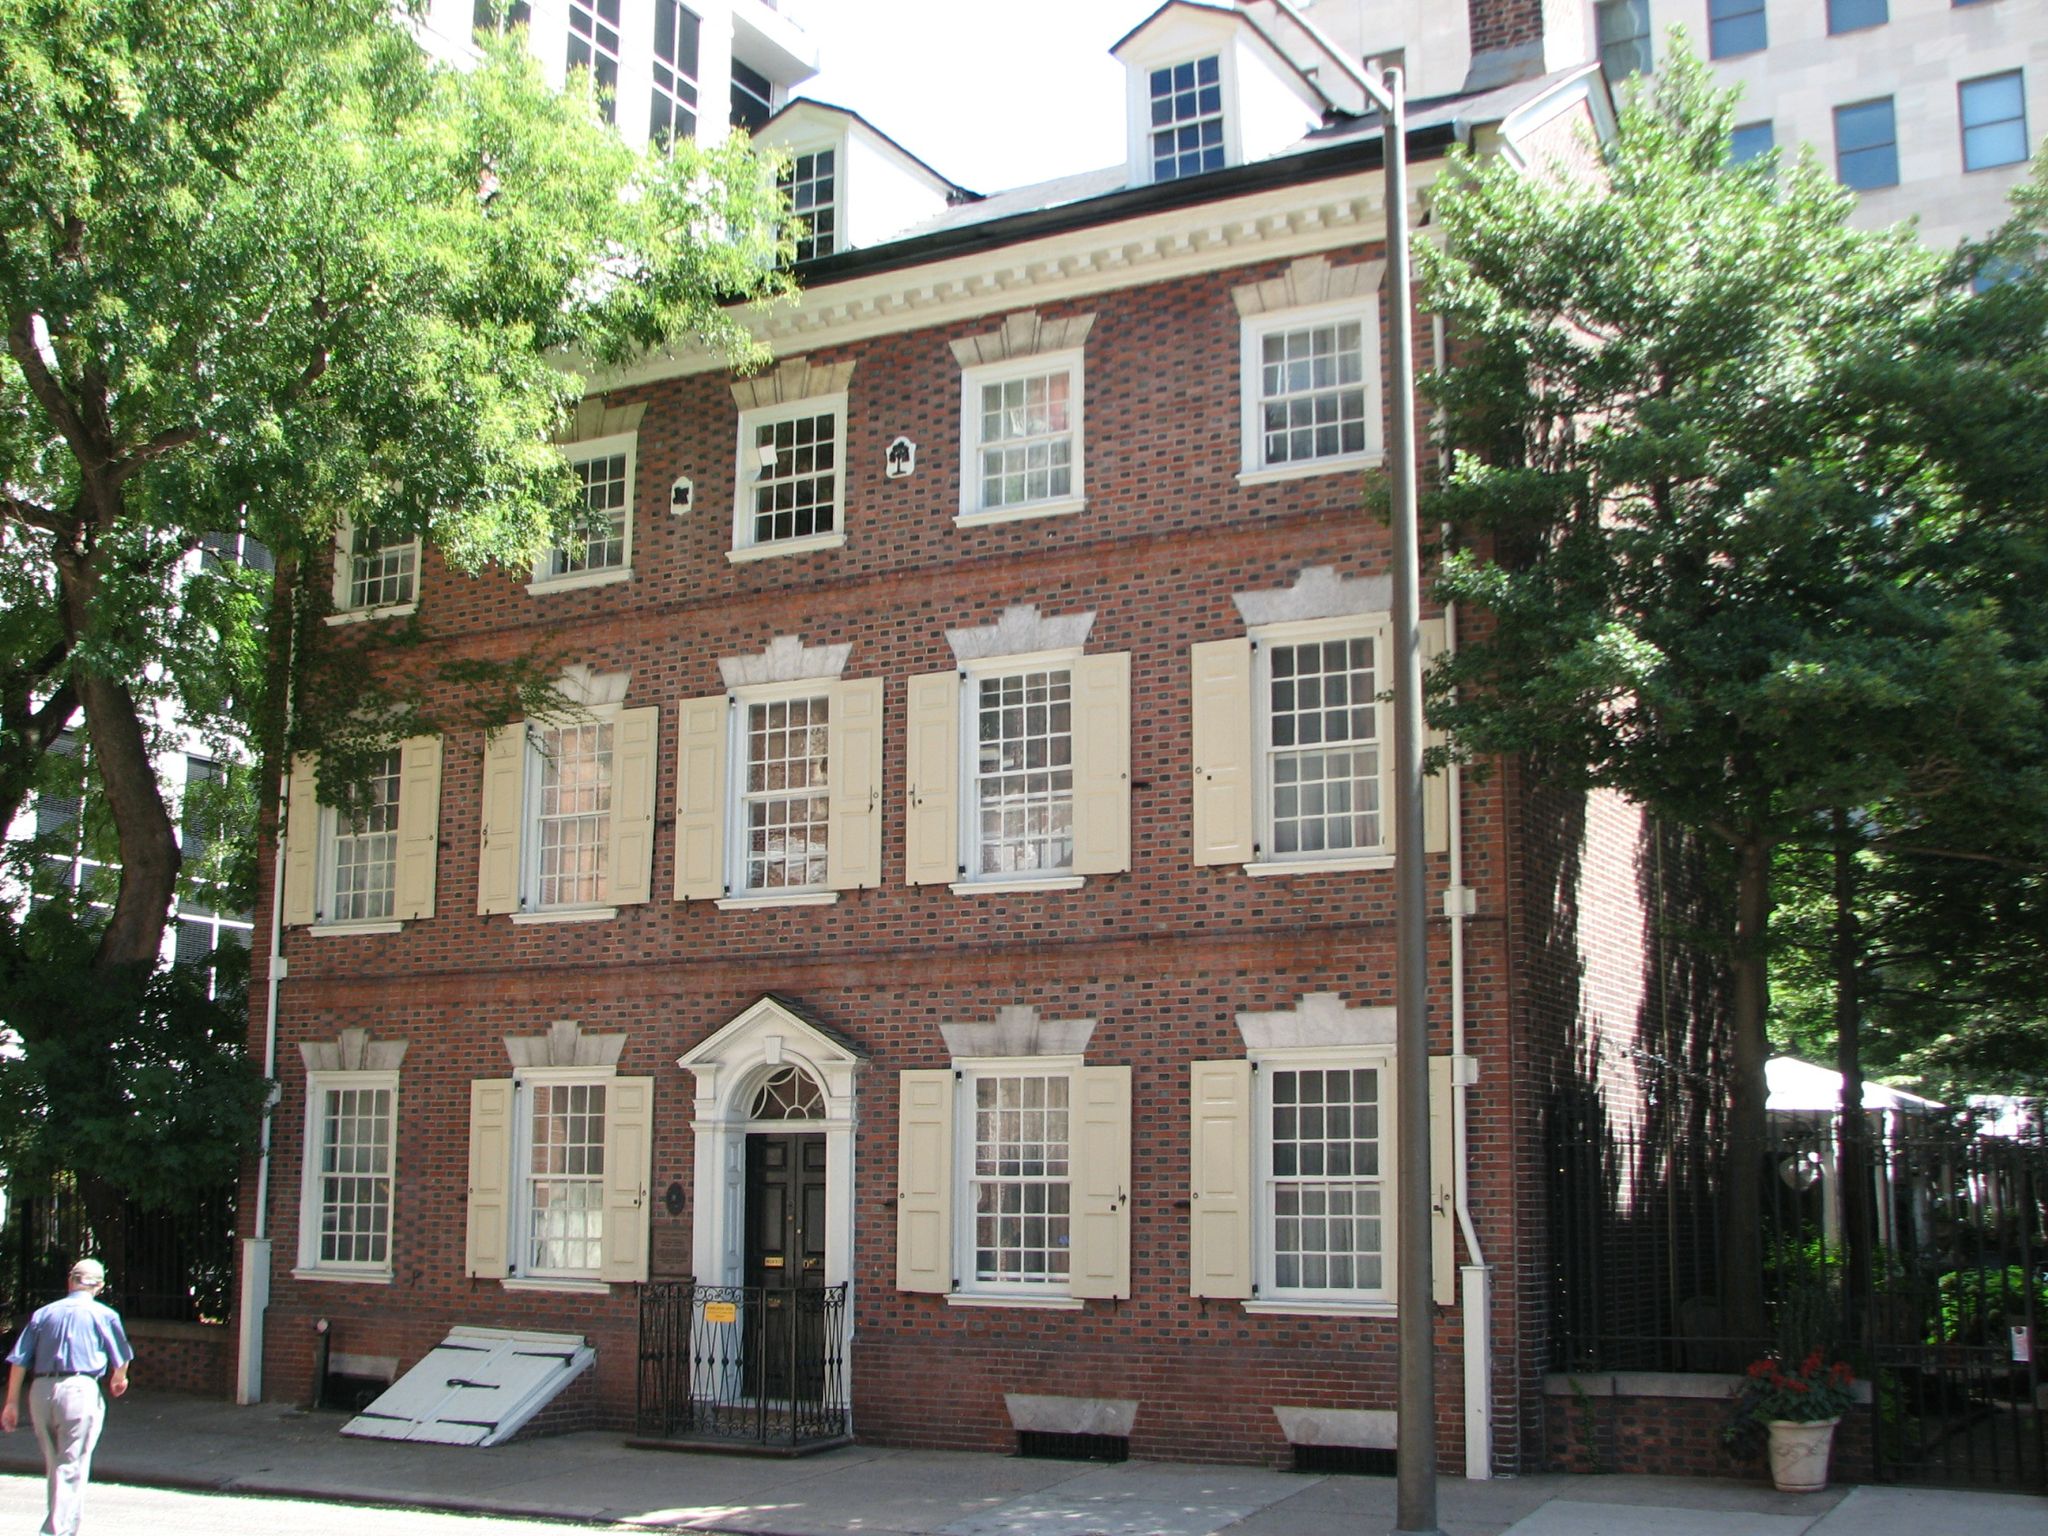 The former Reynolds-Morris House has a modest presence on South 8th Street.